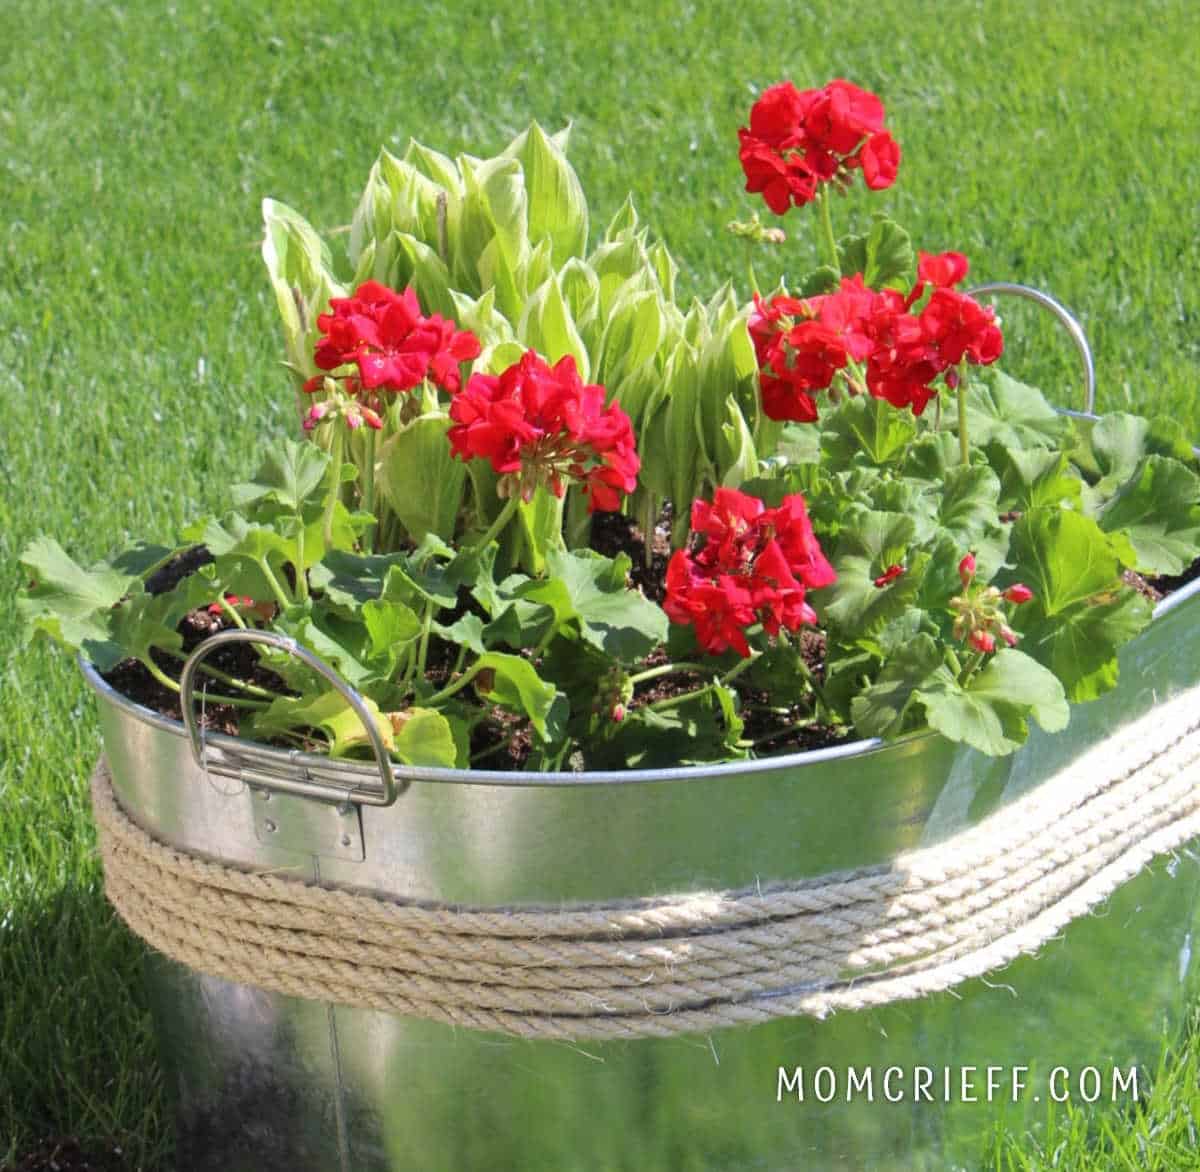 red geraniums and green hostas in a galvanized tub